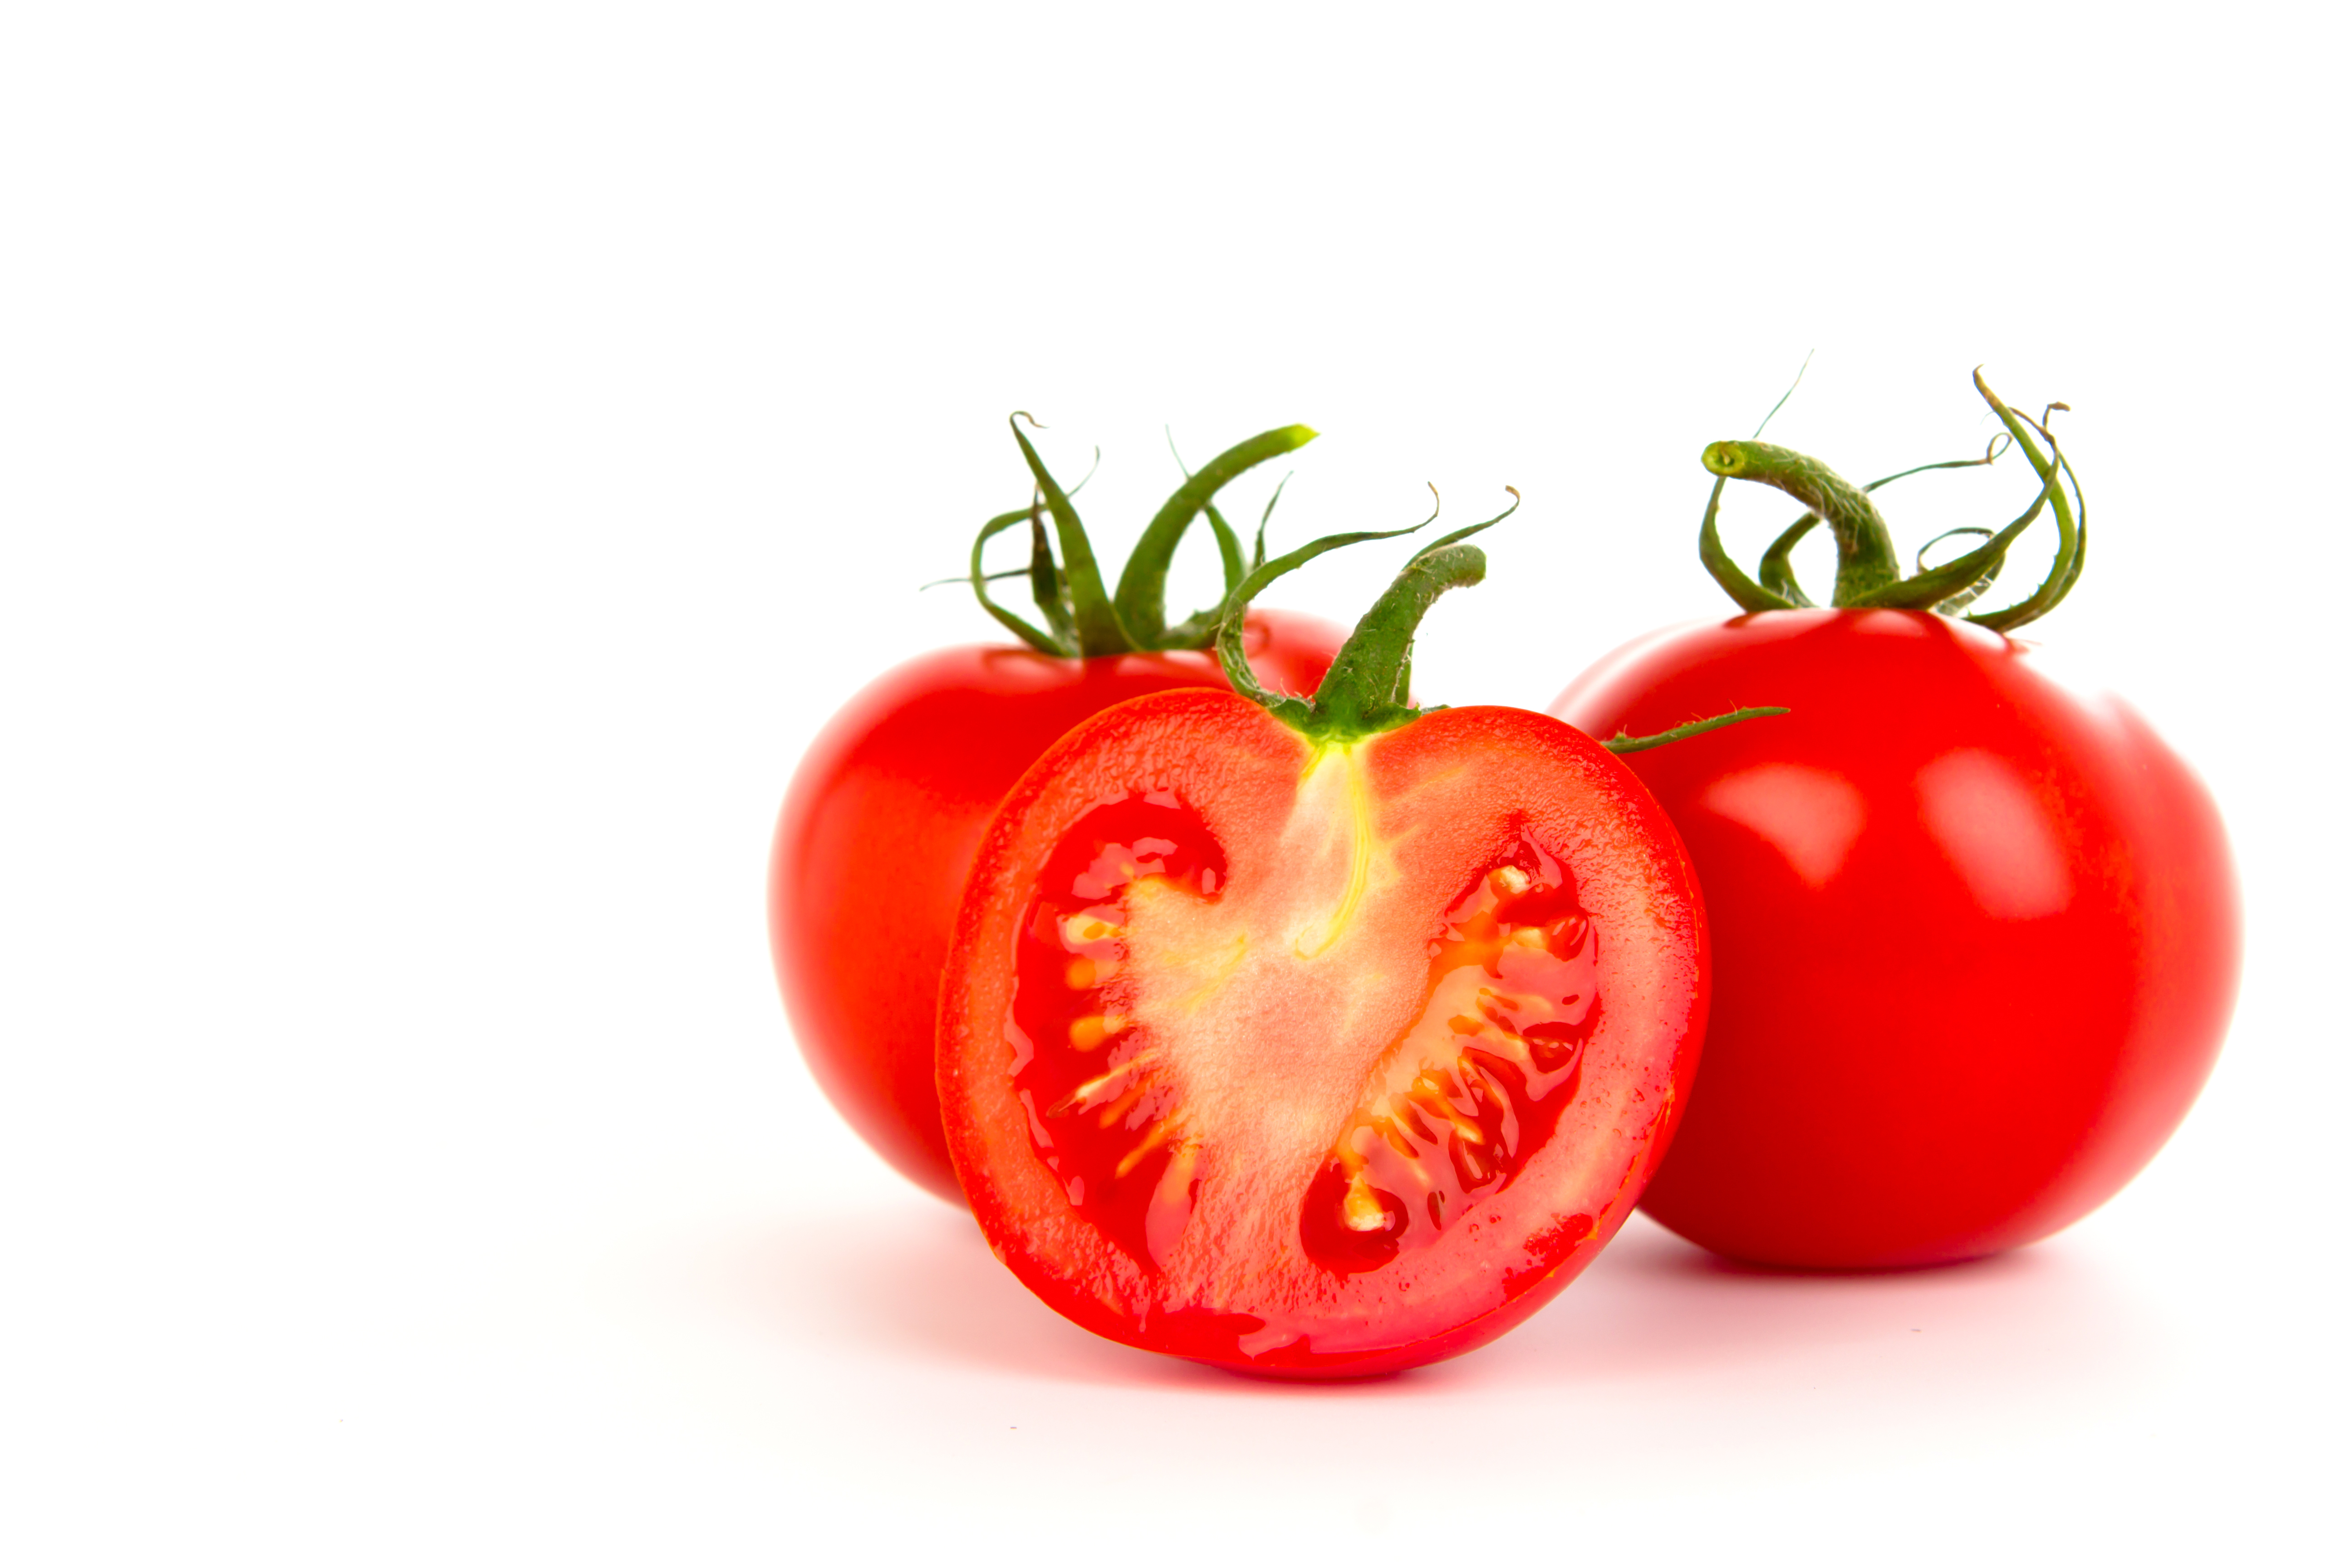 Tomatoes benefits for skin